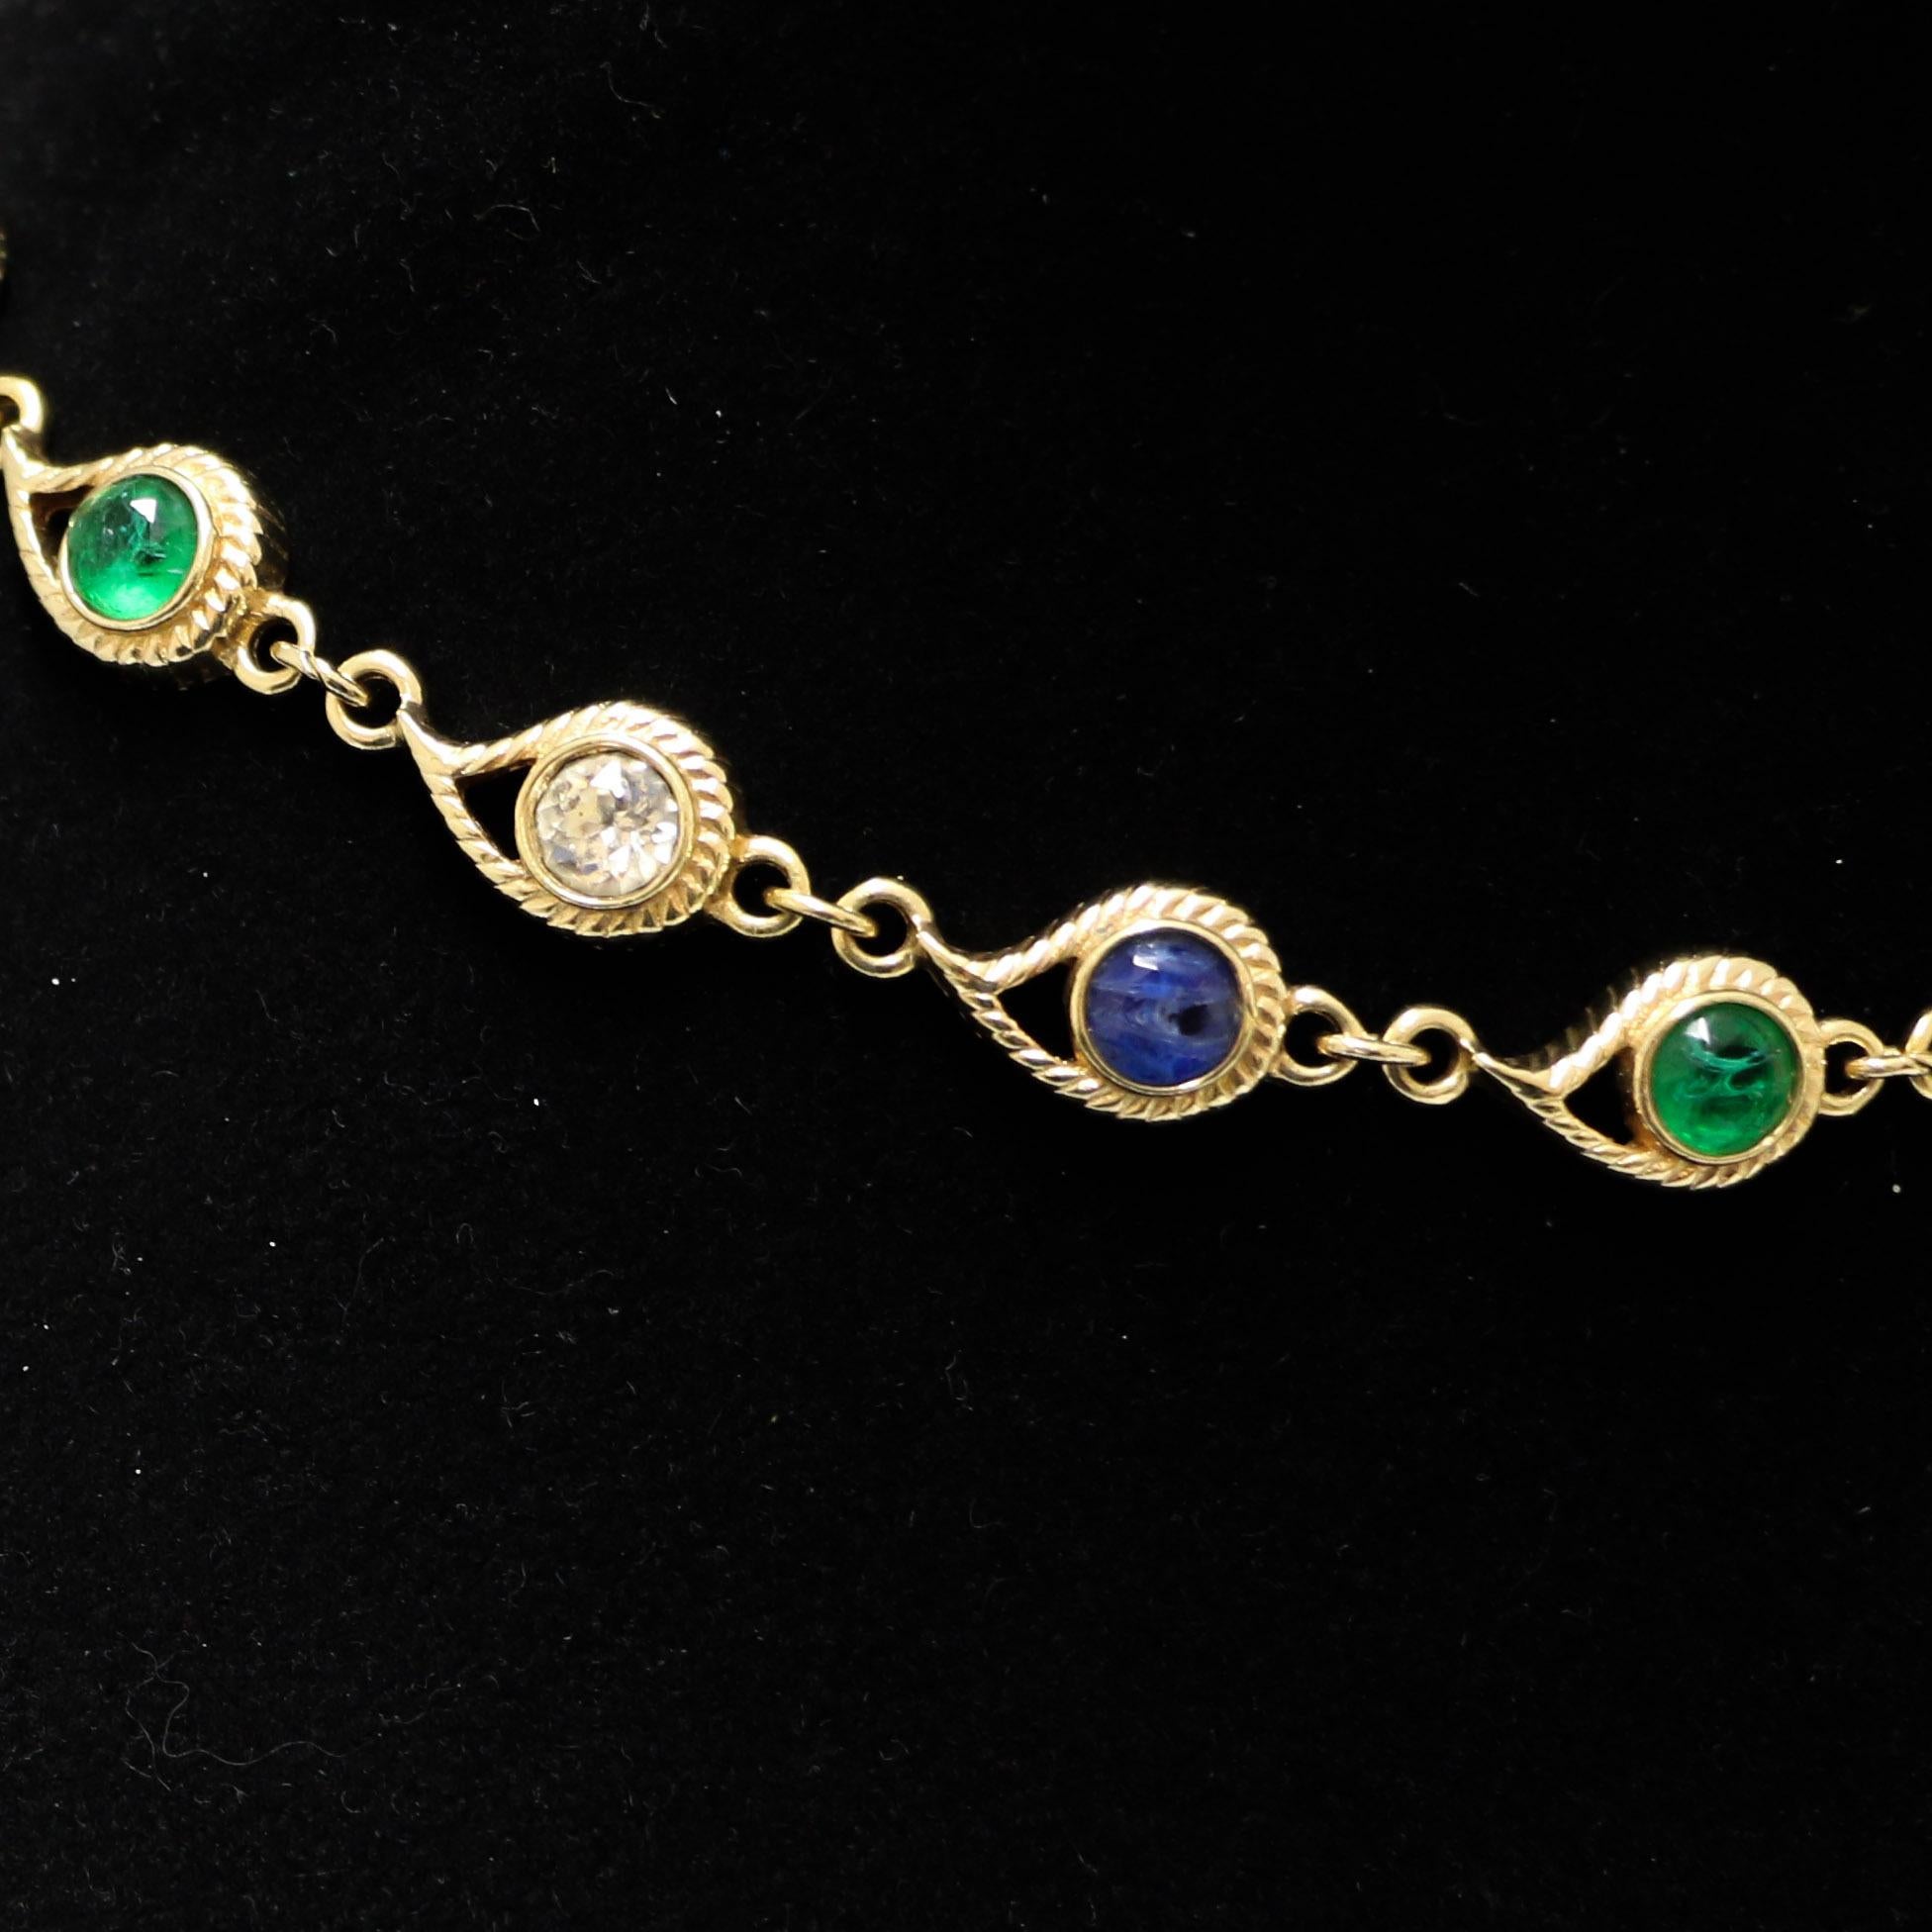 Beautiful Christian Dior multicolor necklace
Condition: very good
Made in Germany
Model: necklace
Material: metal, rhinestones
Color: sapphire, emerald, transparent
Hardware: pale gold
Dimensions: 40 cm total length
Year: 1970s
Details : A shiny